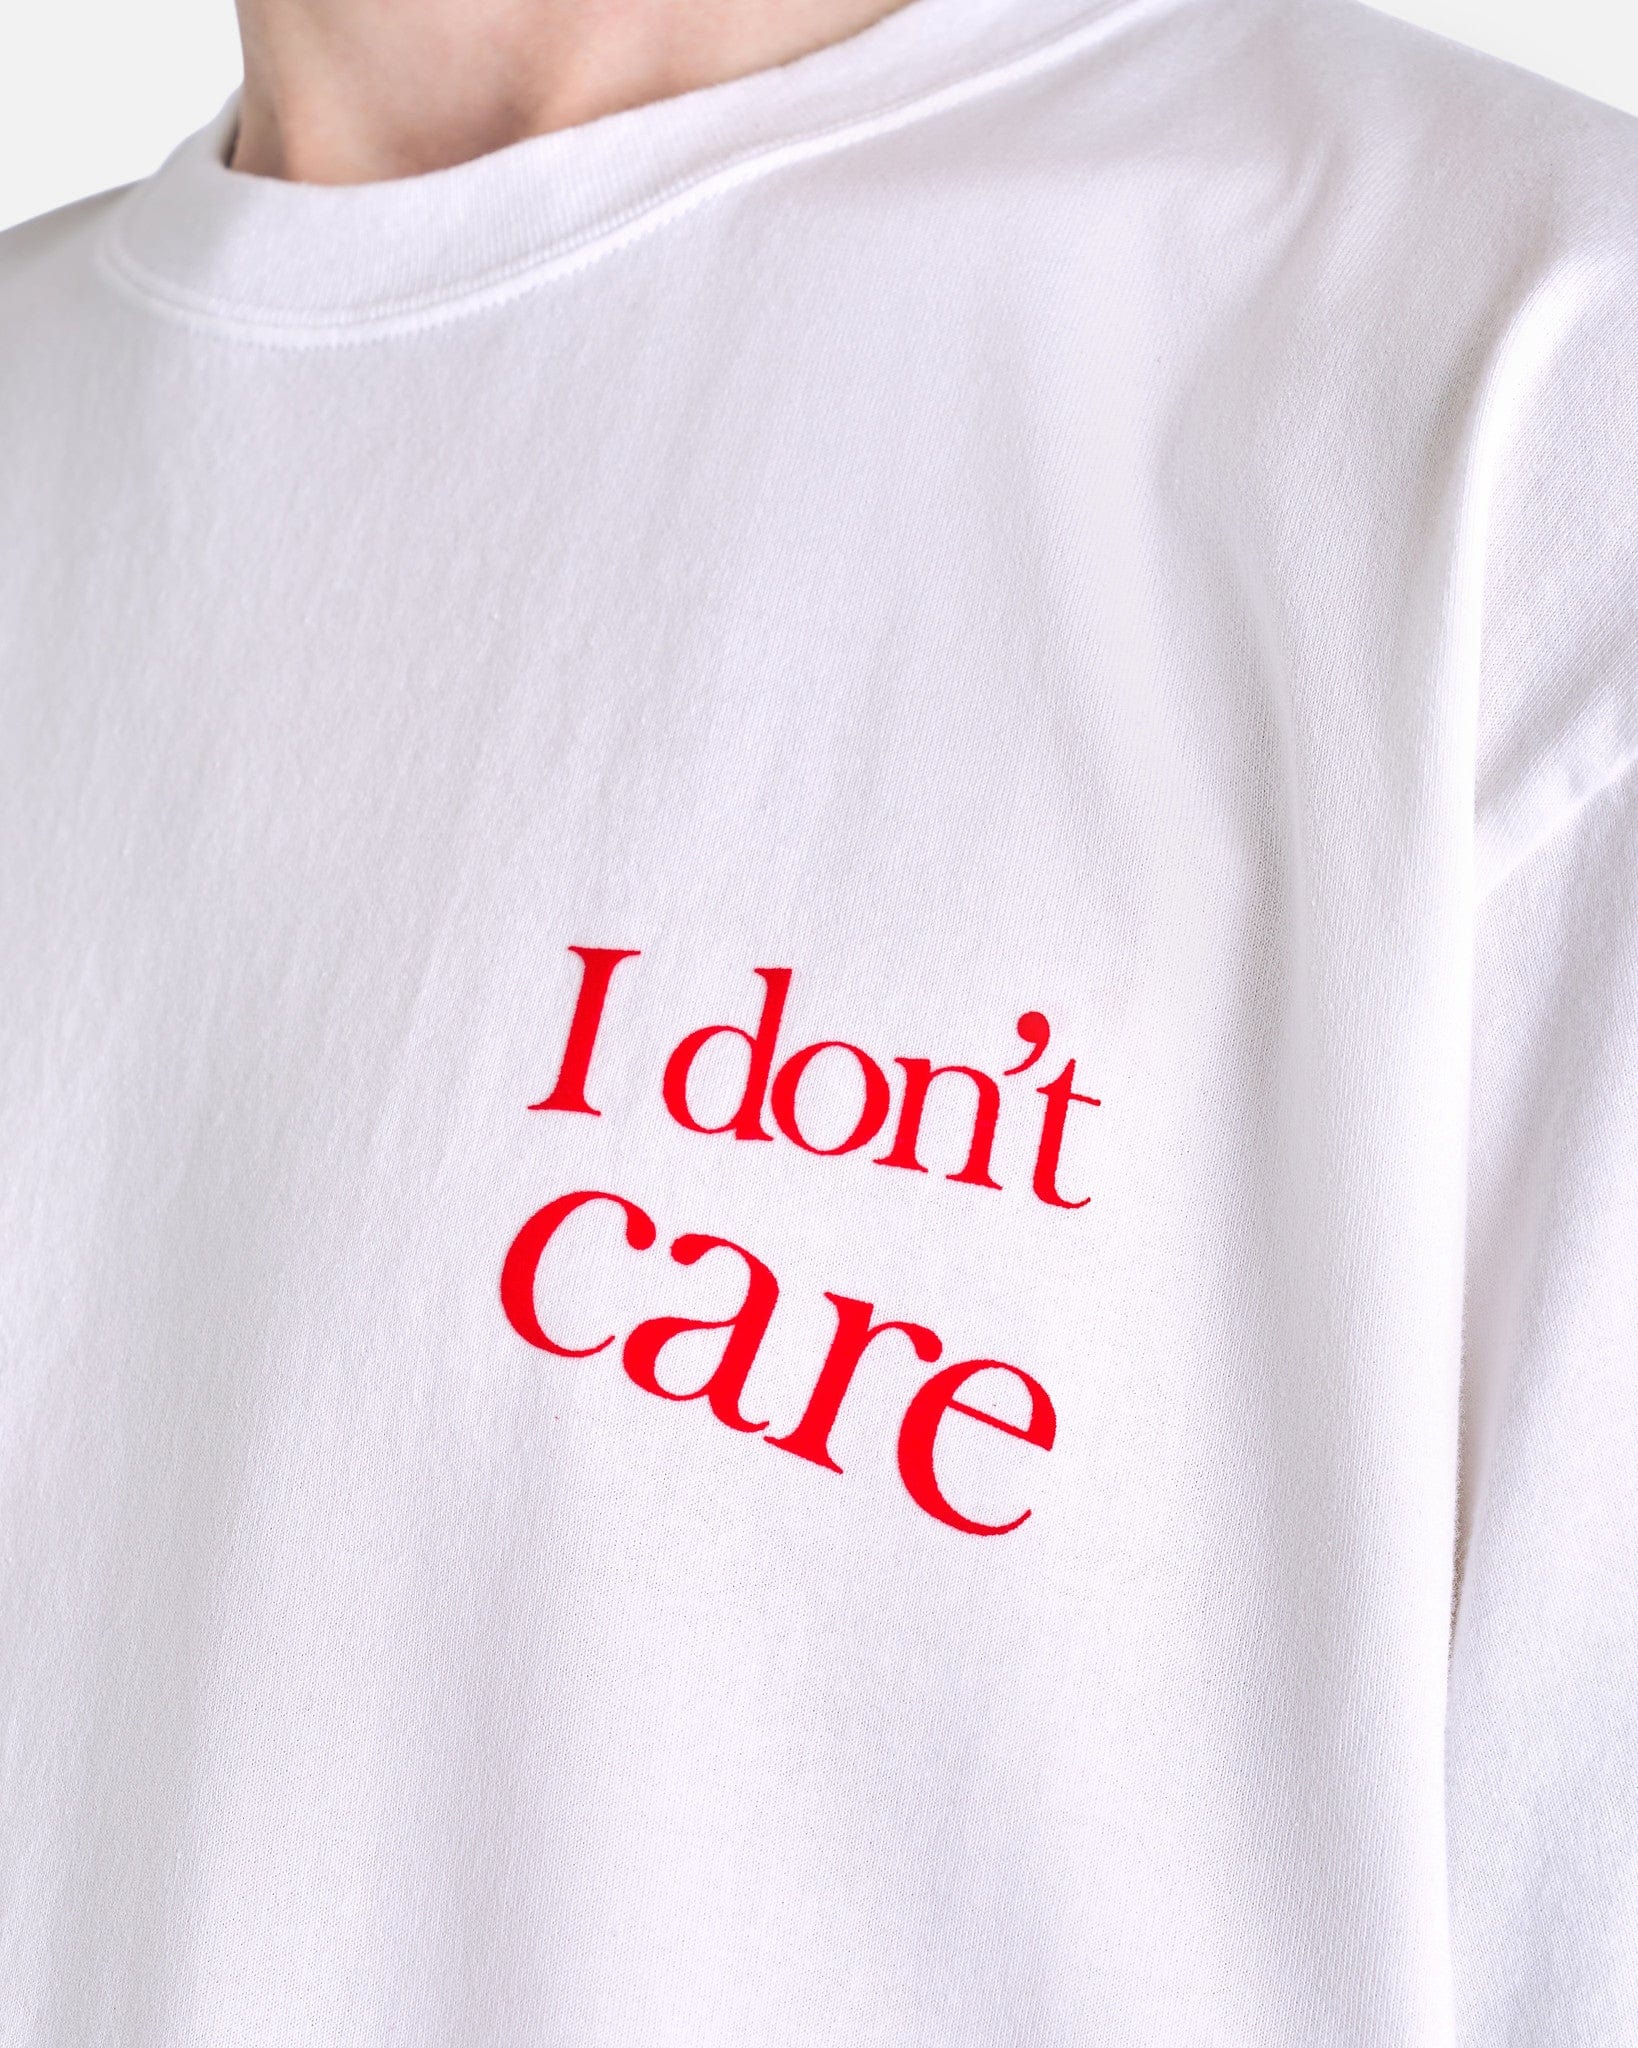 UNDERCOVER Men's T-Shirts 'I Don't Care' Graphic T-Shirt in White